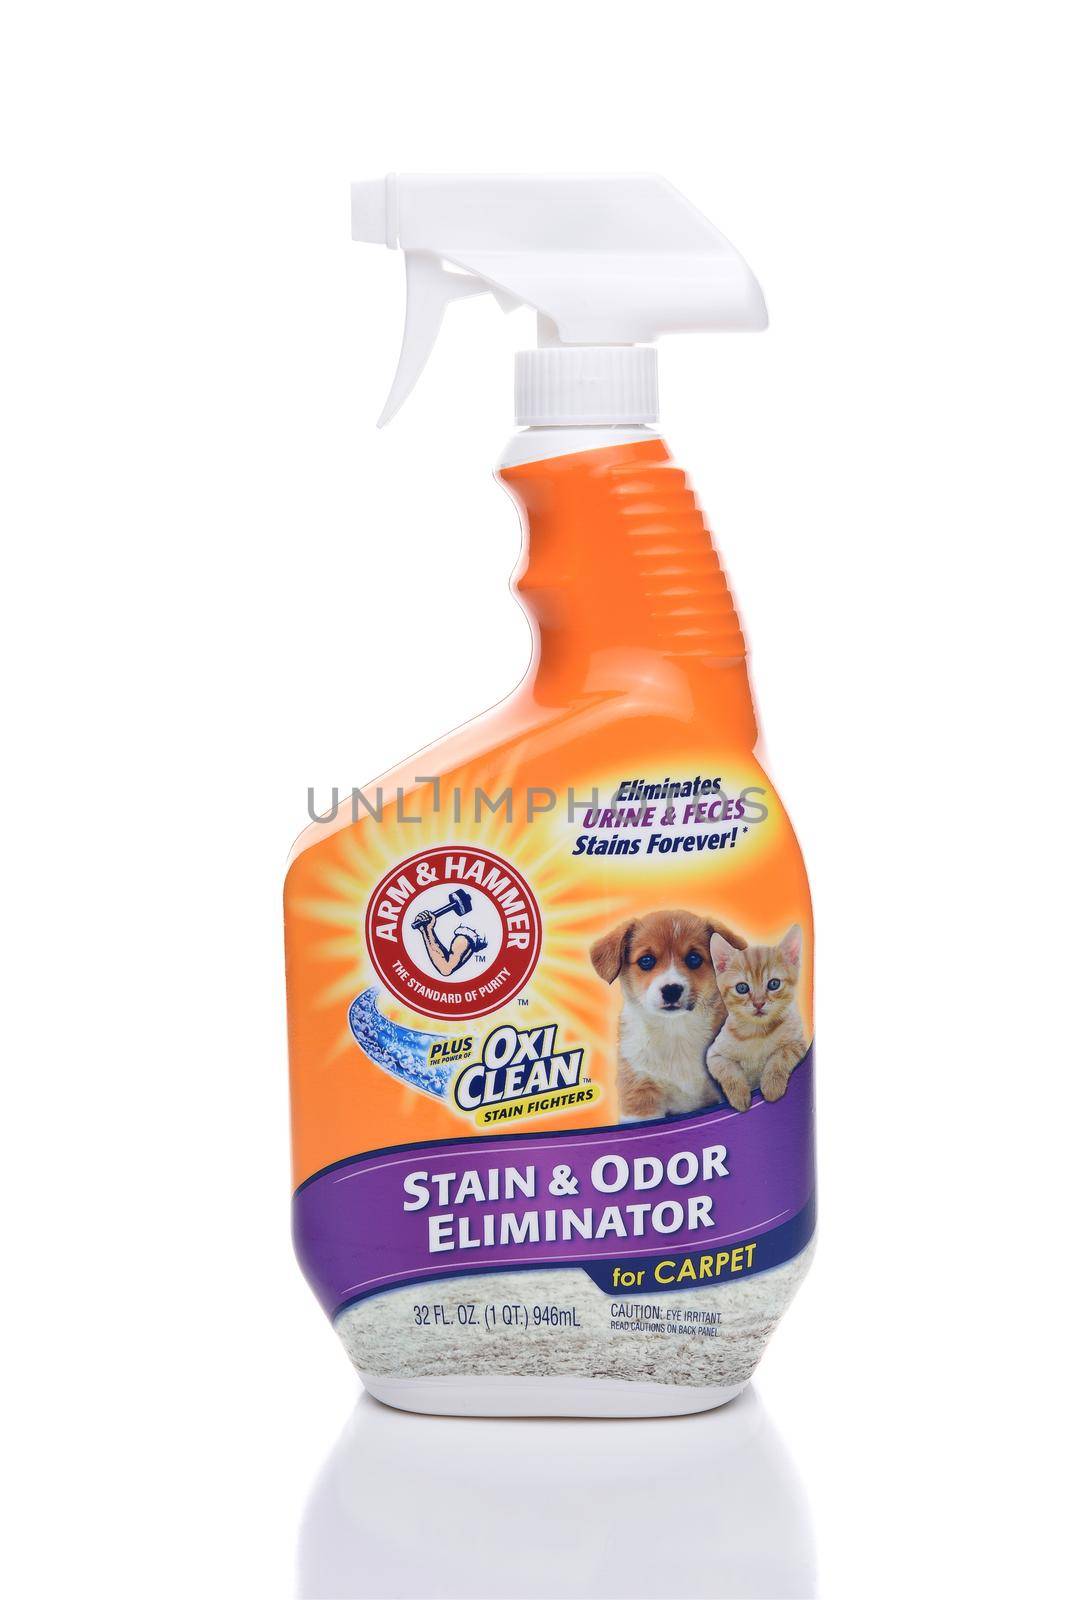 IRVINE, CALIFORNIA - AUGUST 21, 2017:  Arm and Hammer Stain Odor Eliminator. Arm and Hammer is a brand of the Church and Dwight Company.